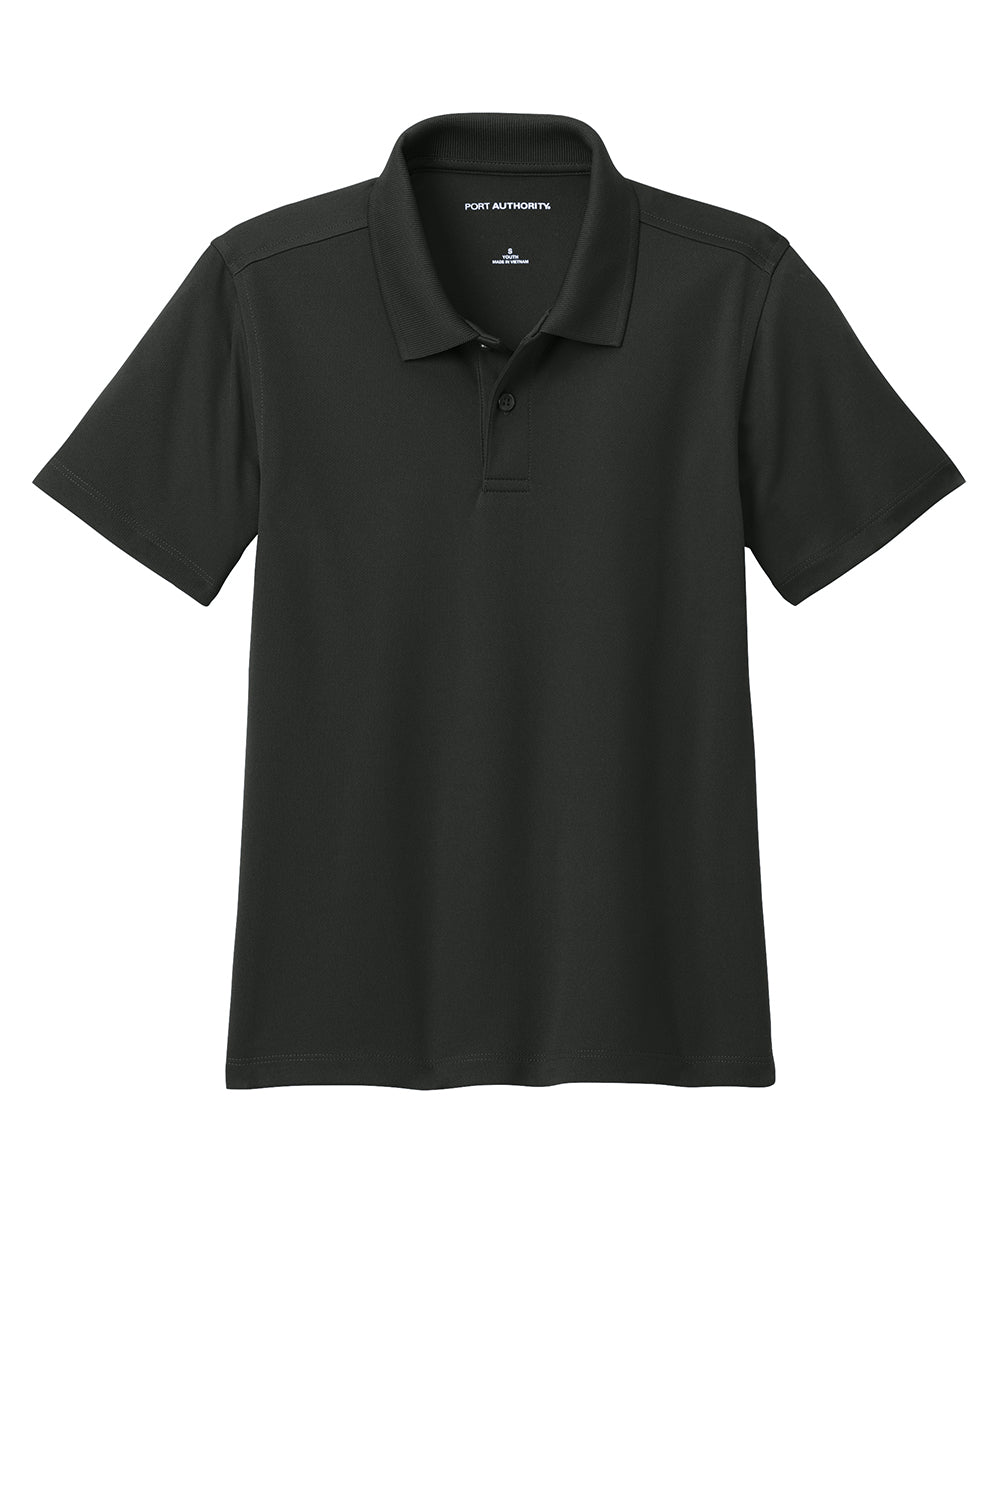 Port Authority Y110 Youth Dry Zone Moisture Wicking Short Sleeve Polo Shirt Deep Black Flat Front